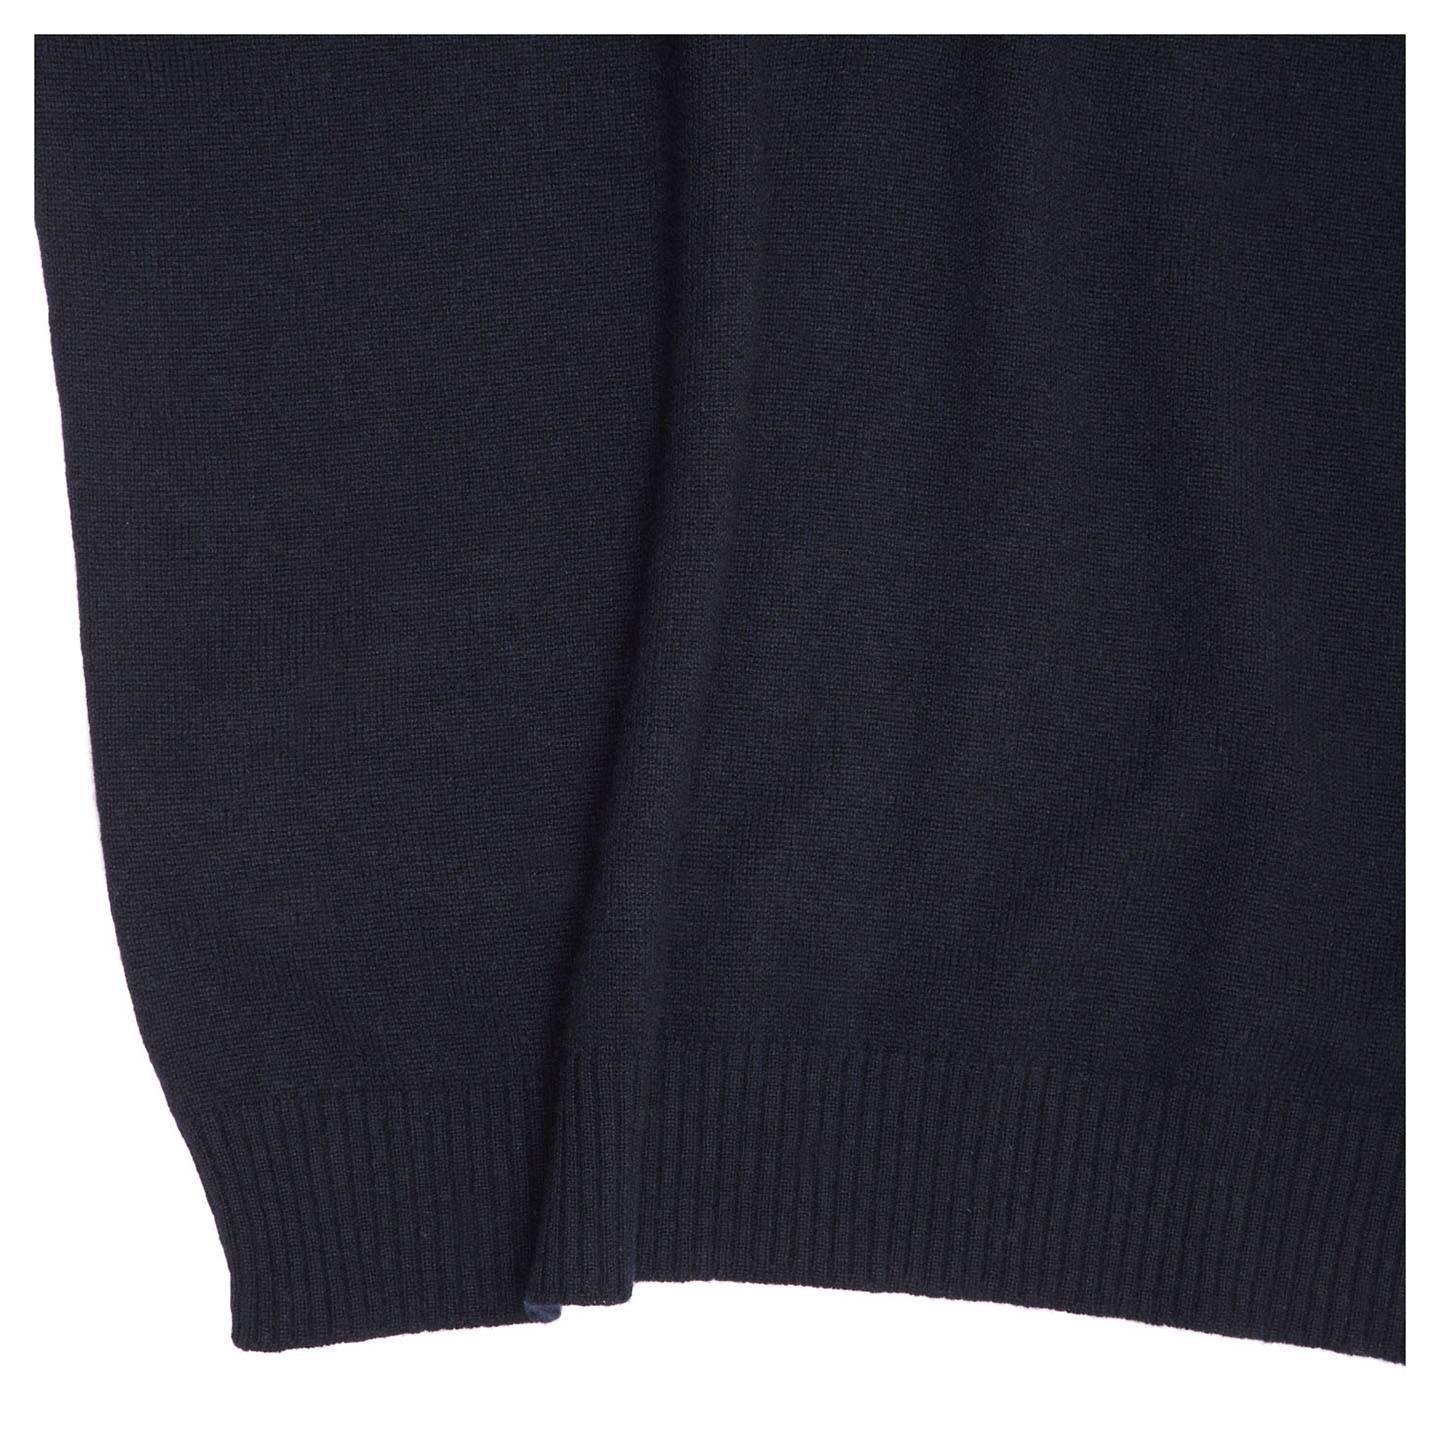 Chanel Navy Cashmere Short Sleeve Sweater In Excellent Condition For Sale In Brooklyn, NY